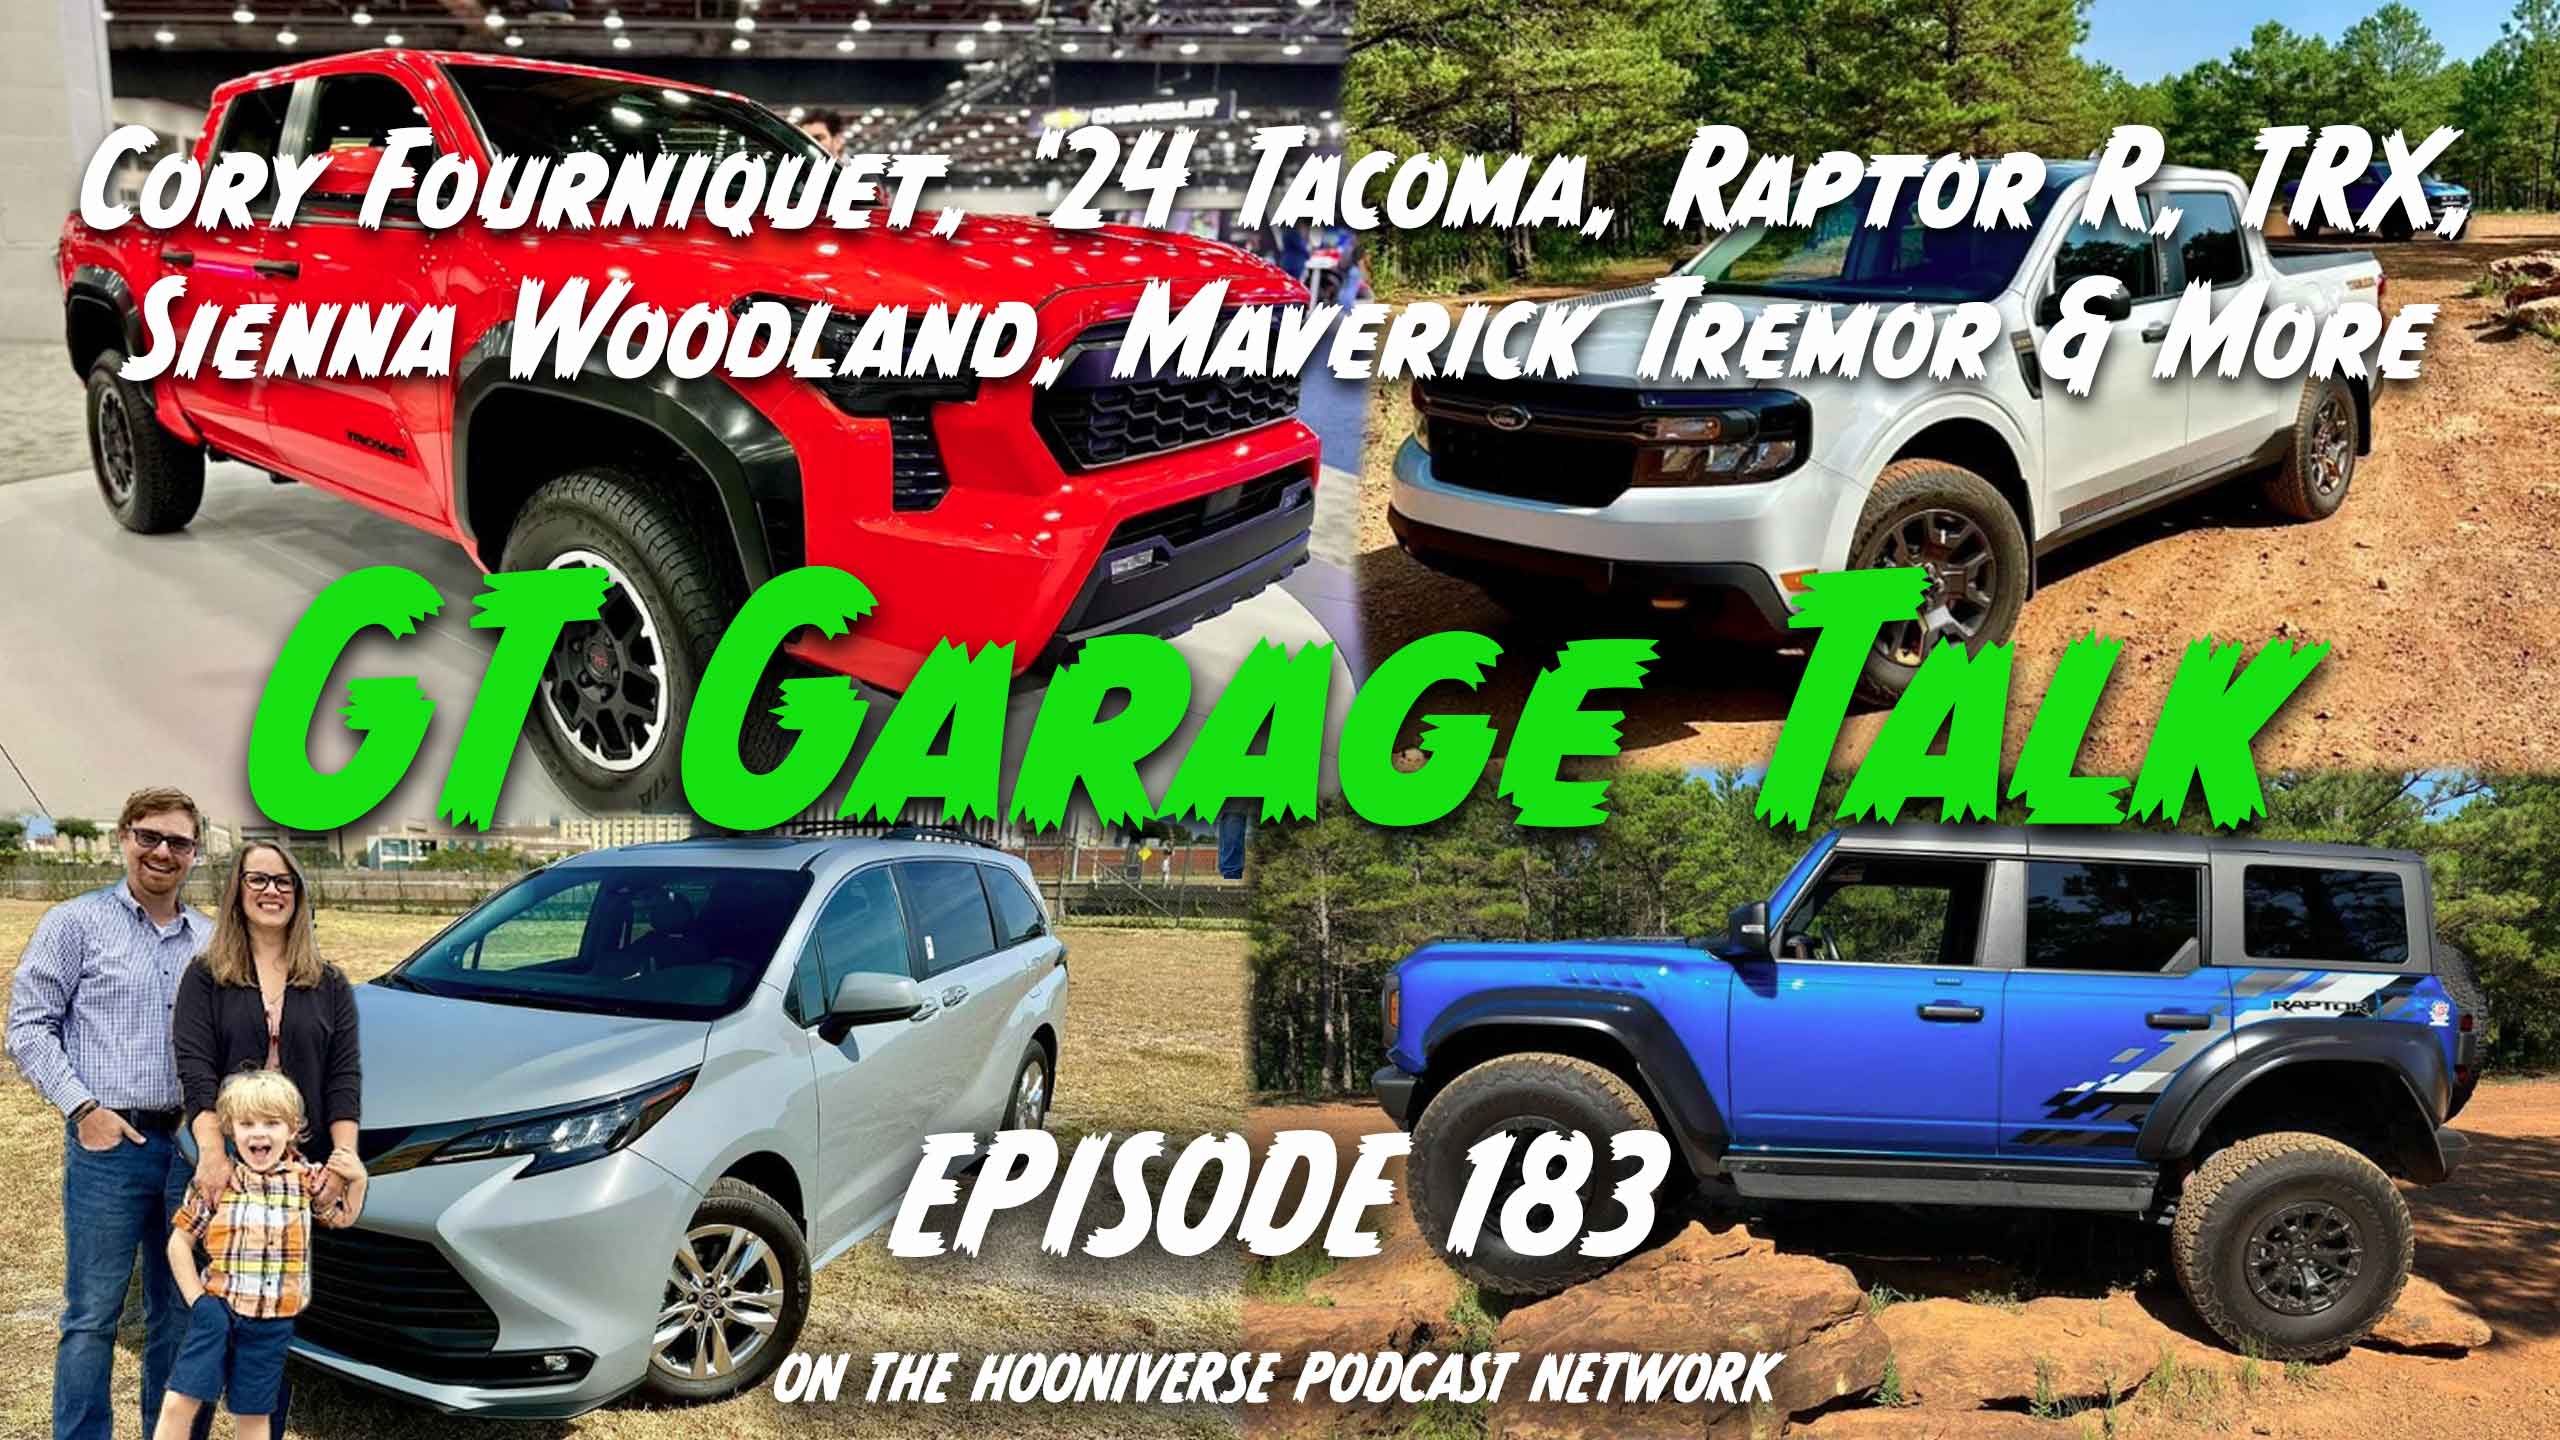 Cory Fourniquet, GT Garage Talk, '24 Tacoma, TRX, Raptor R - Off The Road Again Podcast: Episode 183